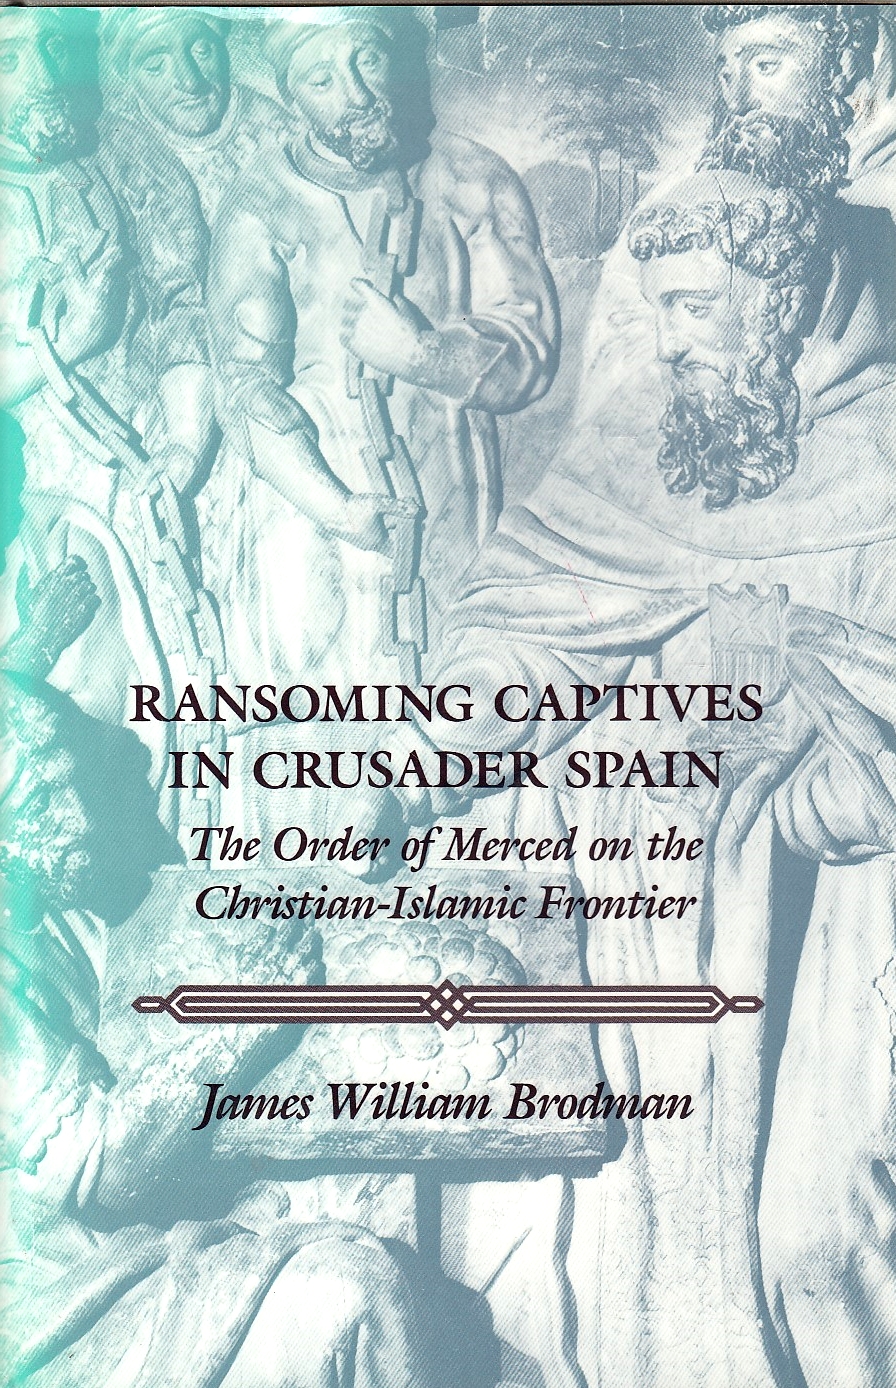 Ransoming captives in crusader Spain : the Order of Merced on the Christian-Islamic frontier.